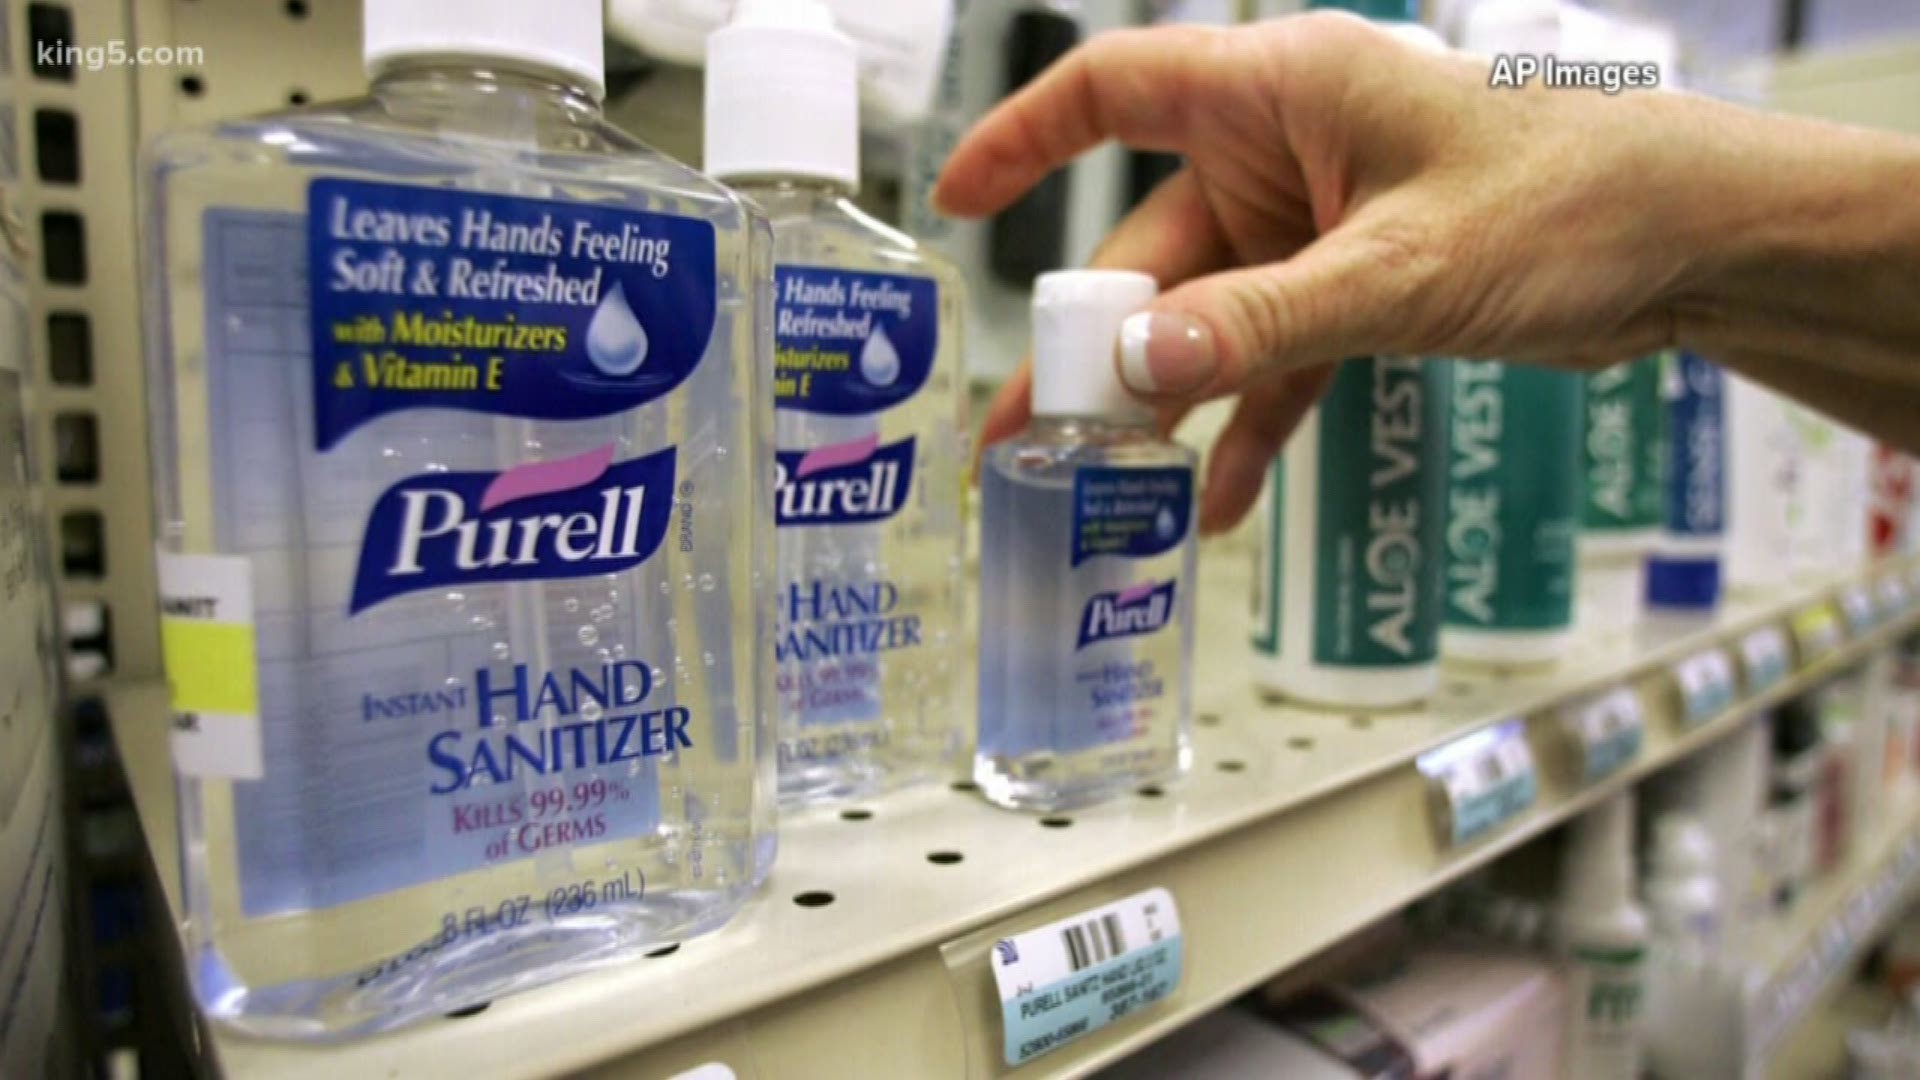 The Food & Drug Administration warns GOJO Industries, makers of Purell hand sanitizer, against using "unproven claims" about the gel killing flu and ebola viruses